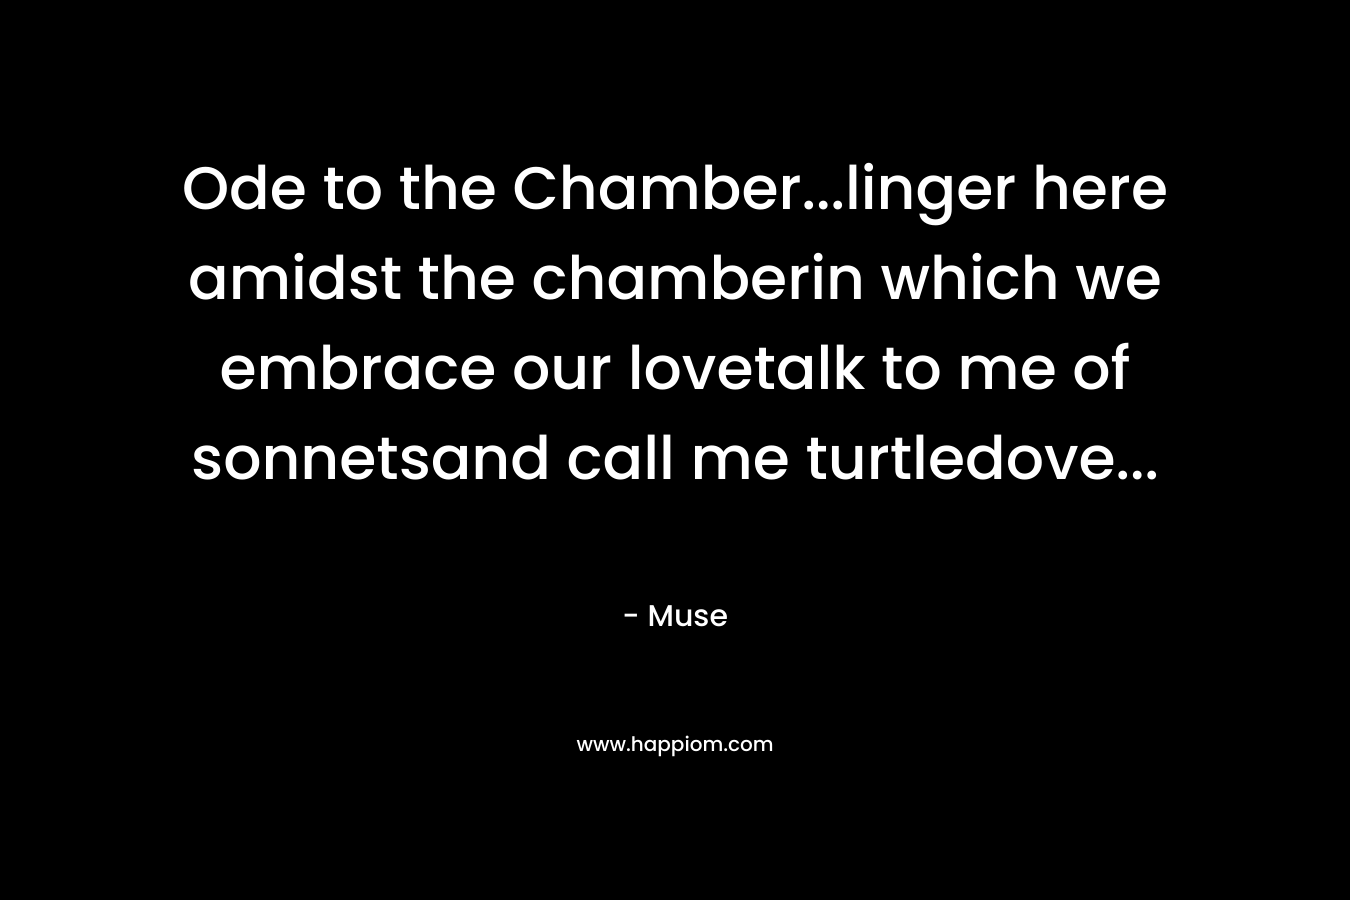 Ode to the Chamber…linger here amidst the chamberin which we embrace our lovetalk to me of sonnetsand call me turtledove… – Muse